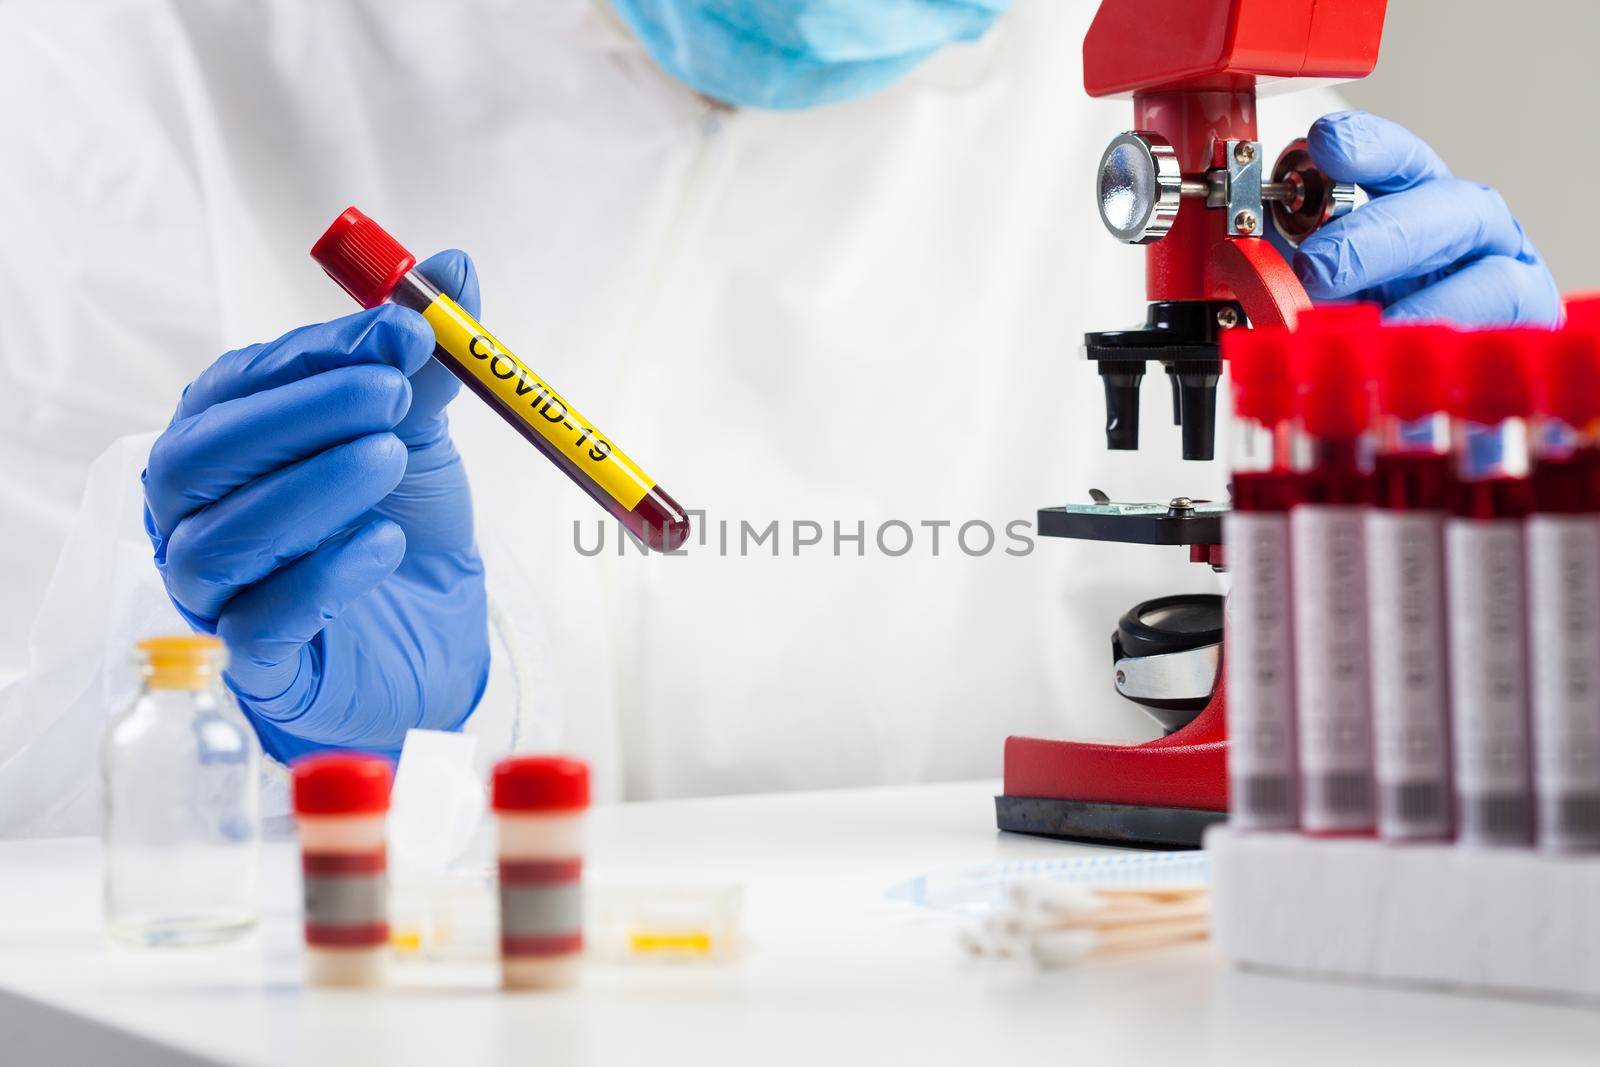 Lab technician holding test tube with label COVID-19,microscope analysis of recovered Coronavirus patient blood specimen sample,antibody convalescent platelet rich plasma serum therapy,immune system